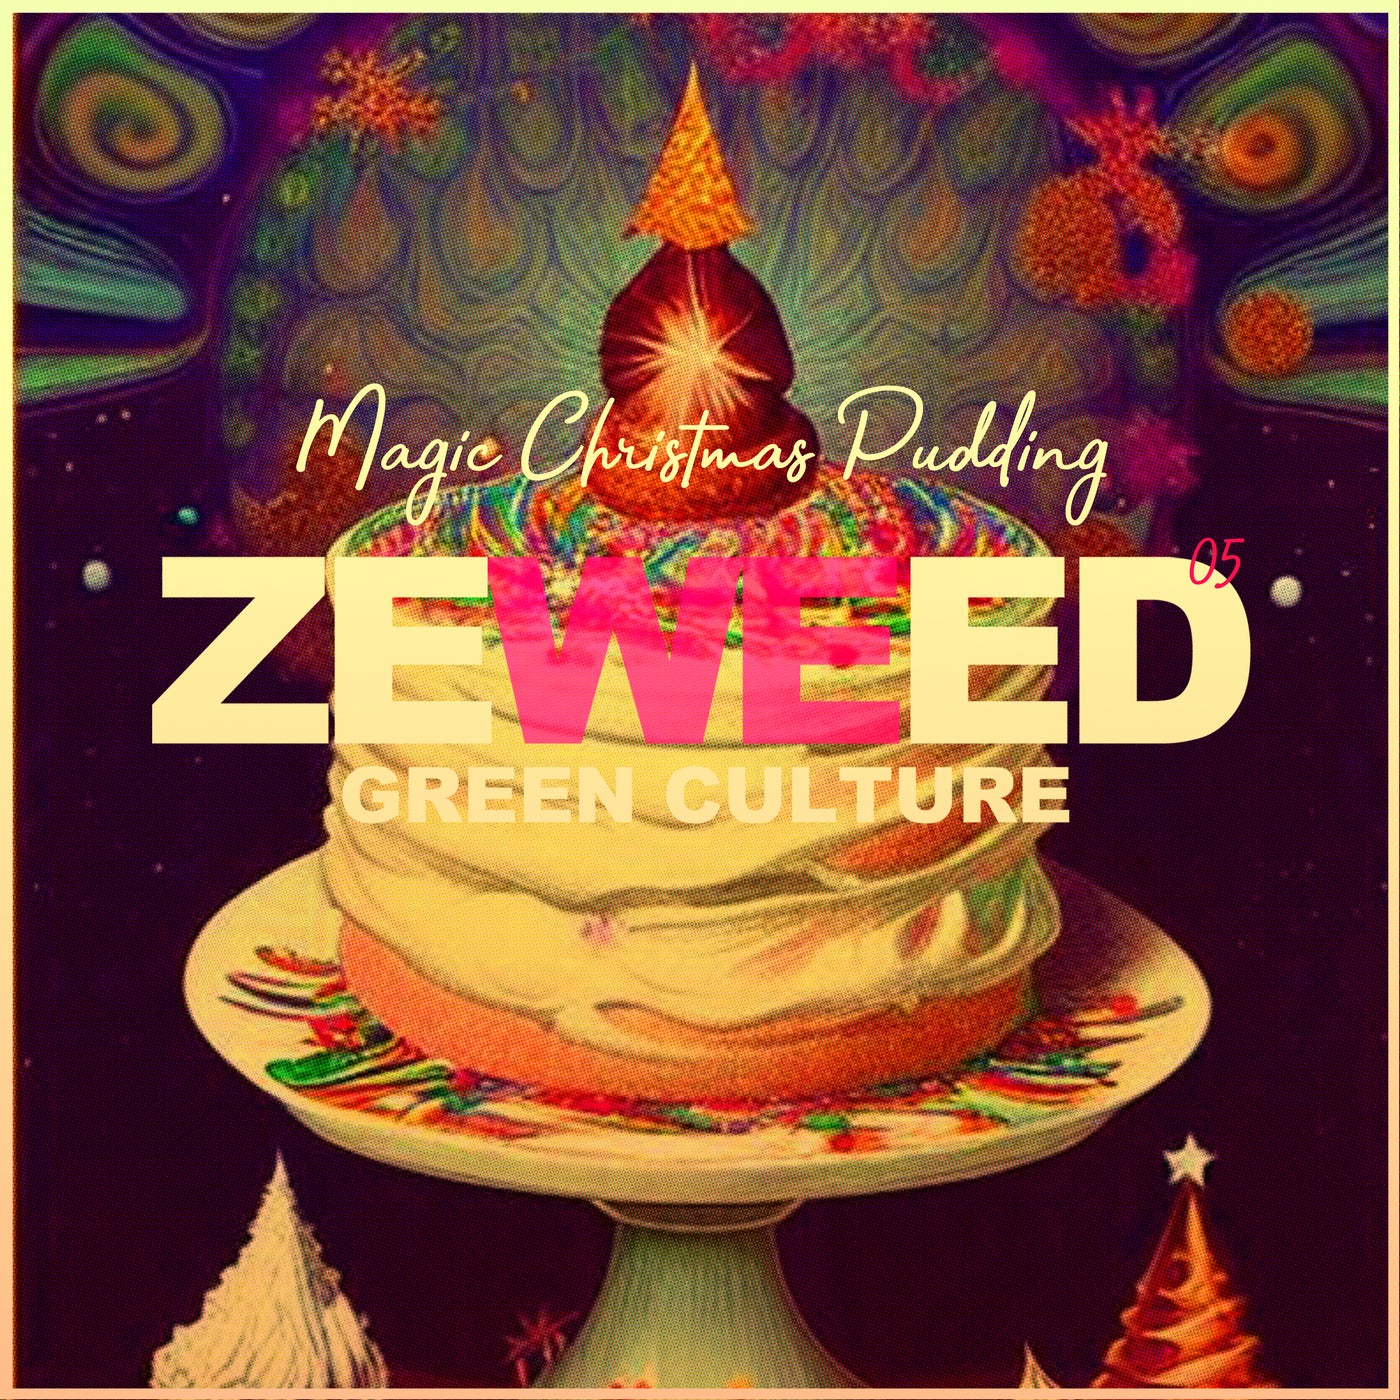 Zeweed 05 (Magic Christmas Pudding Green culture)